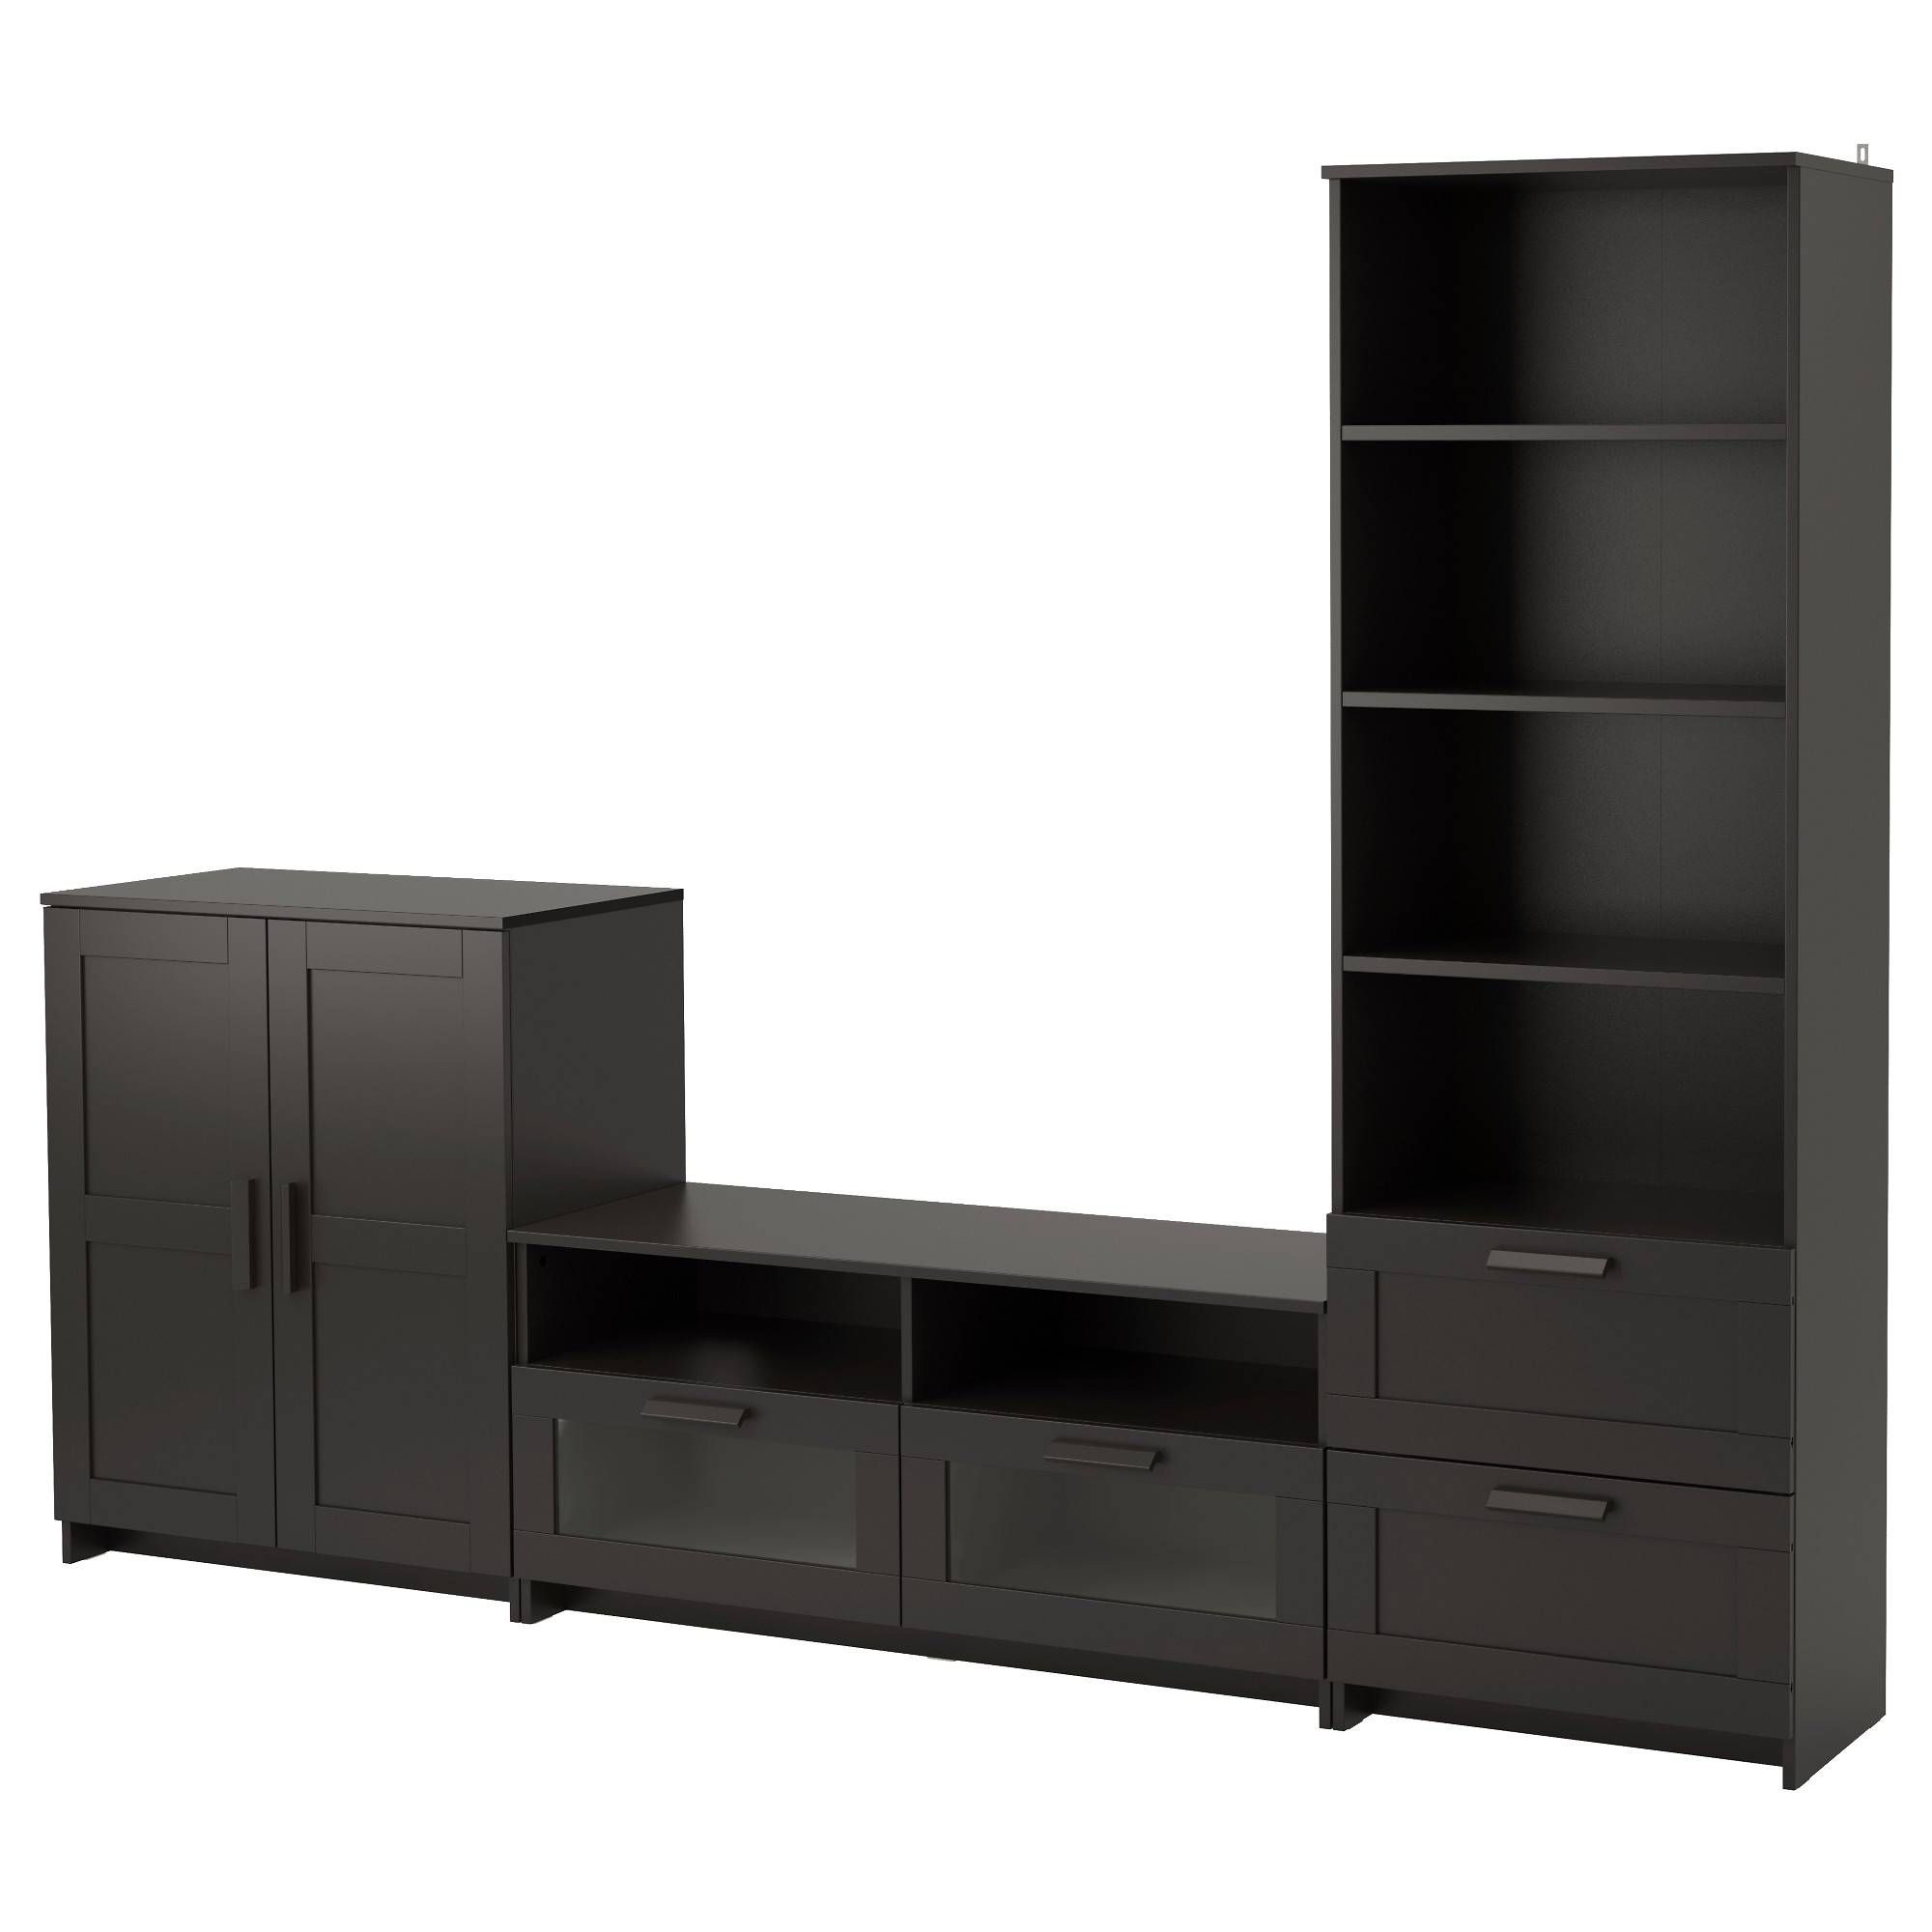 Brimnes Tv Storage Combination Black 260x41x190 Cm – Ikea Throughout Tv Stands With Drawers And Shelves (View 12 of 15)